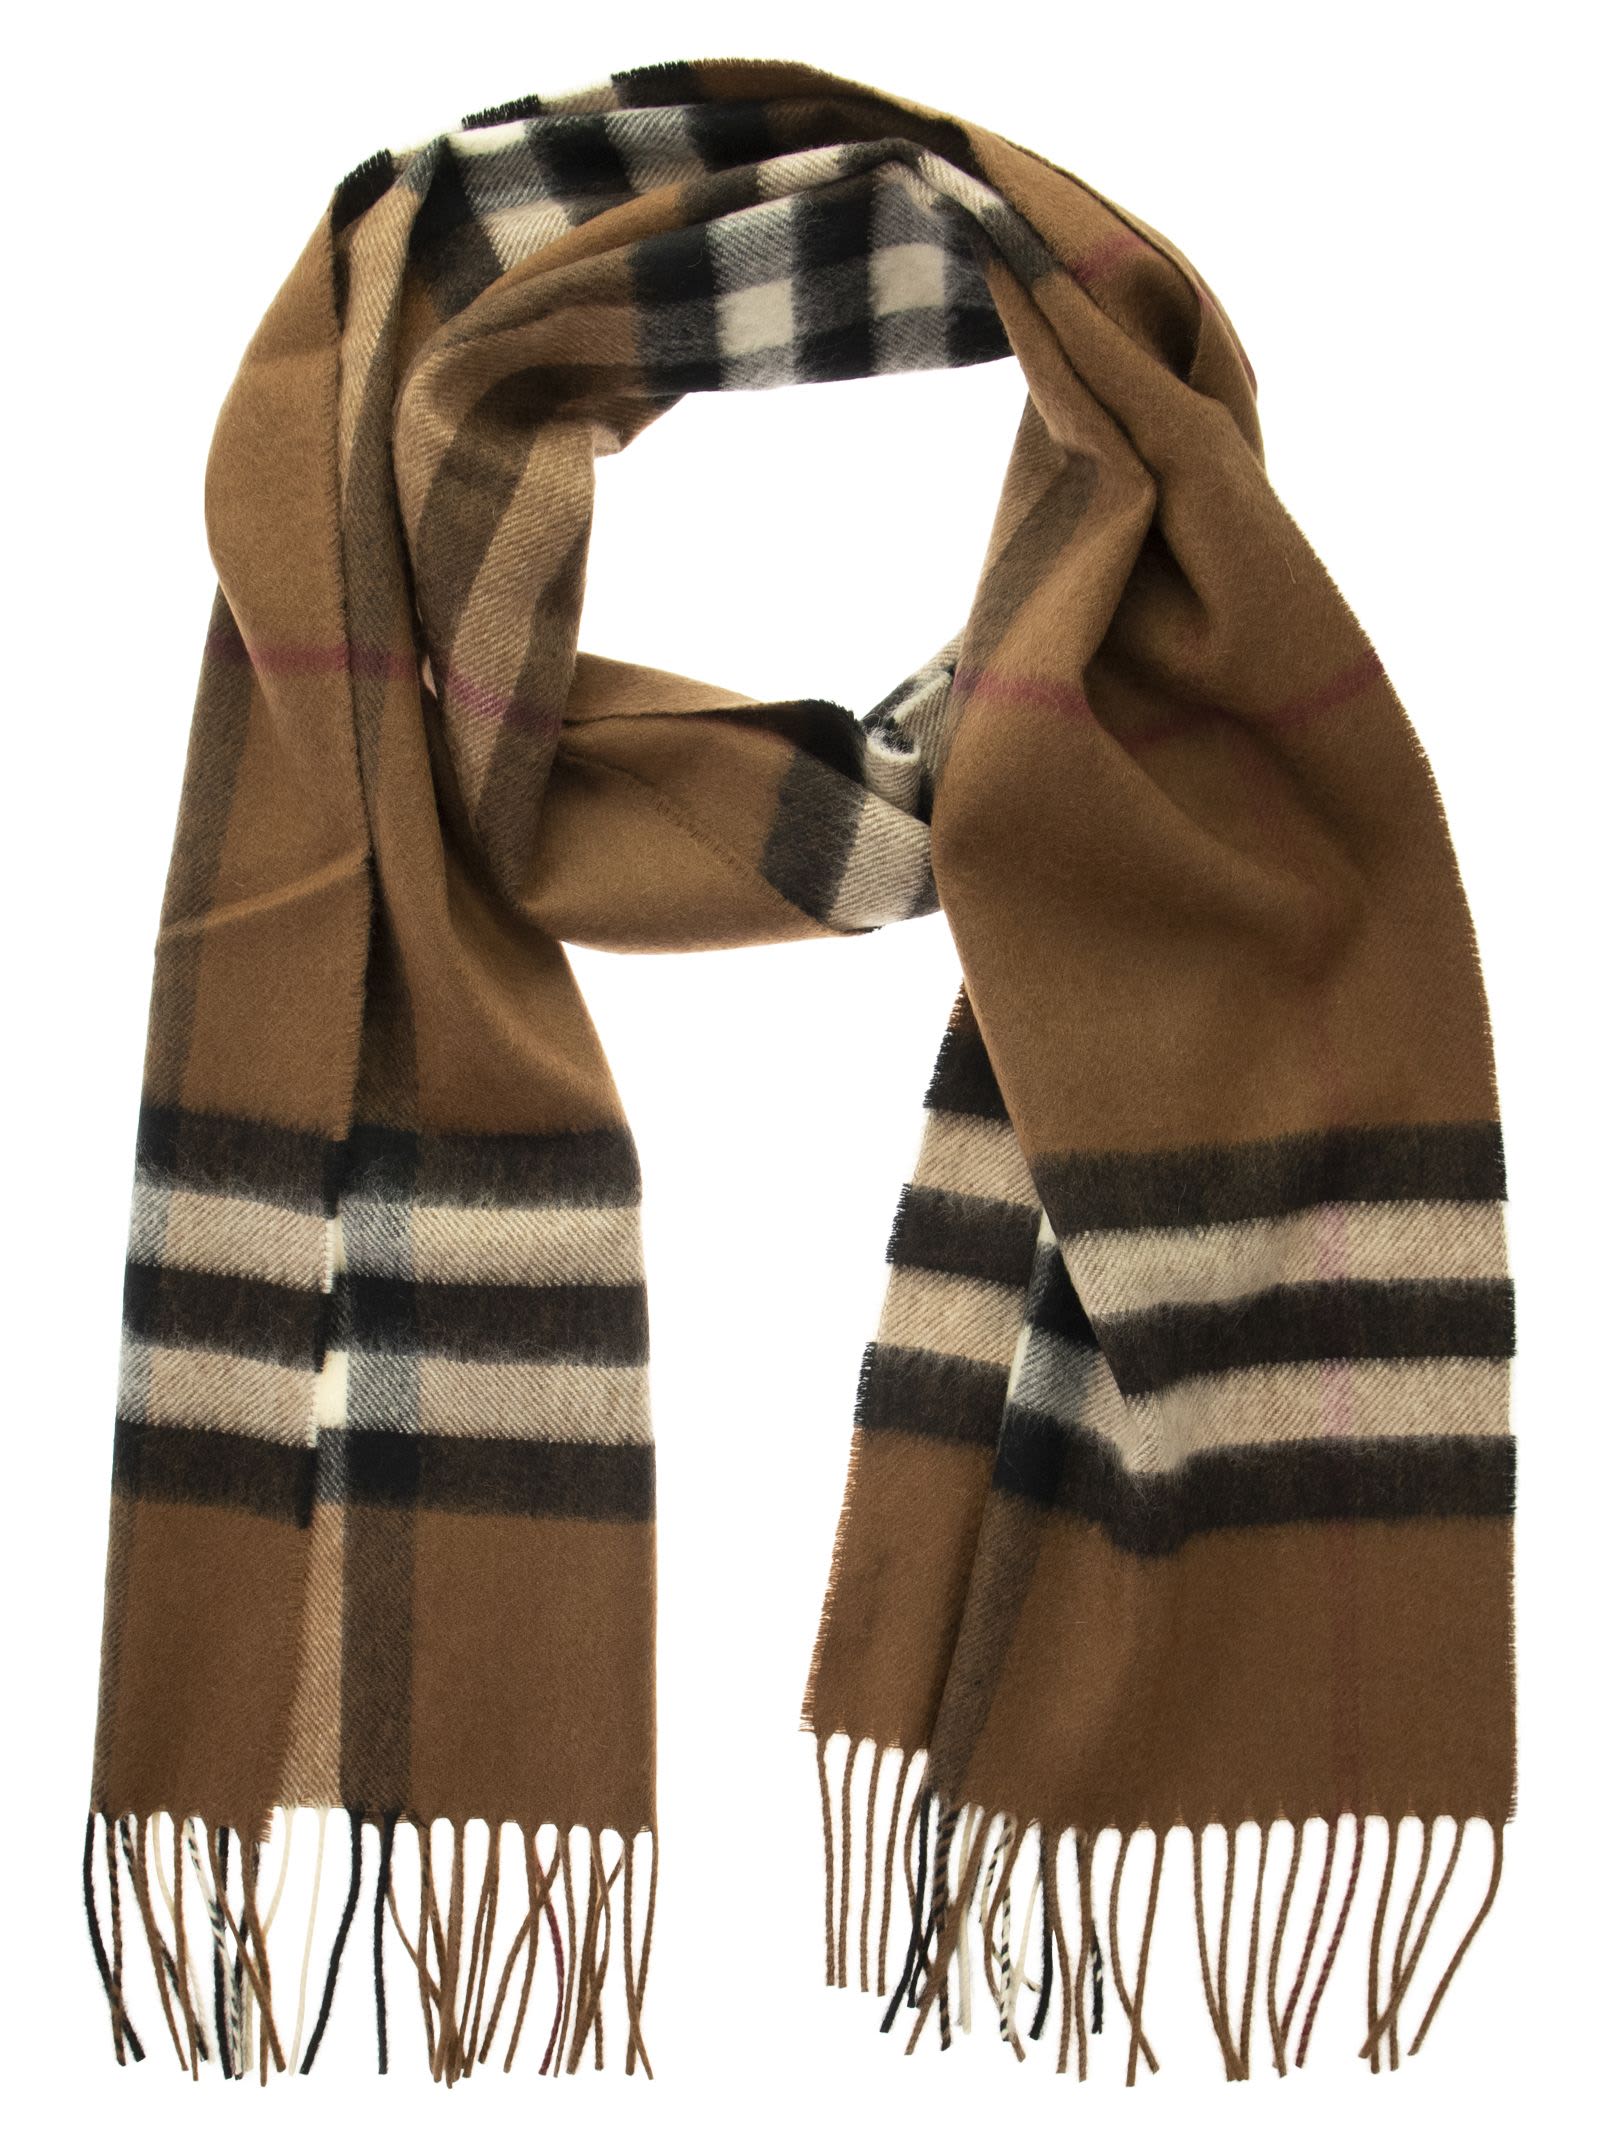 Burberry Classic Cashmere Scarf With Tartan Pattern